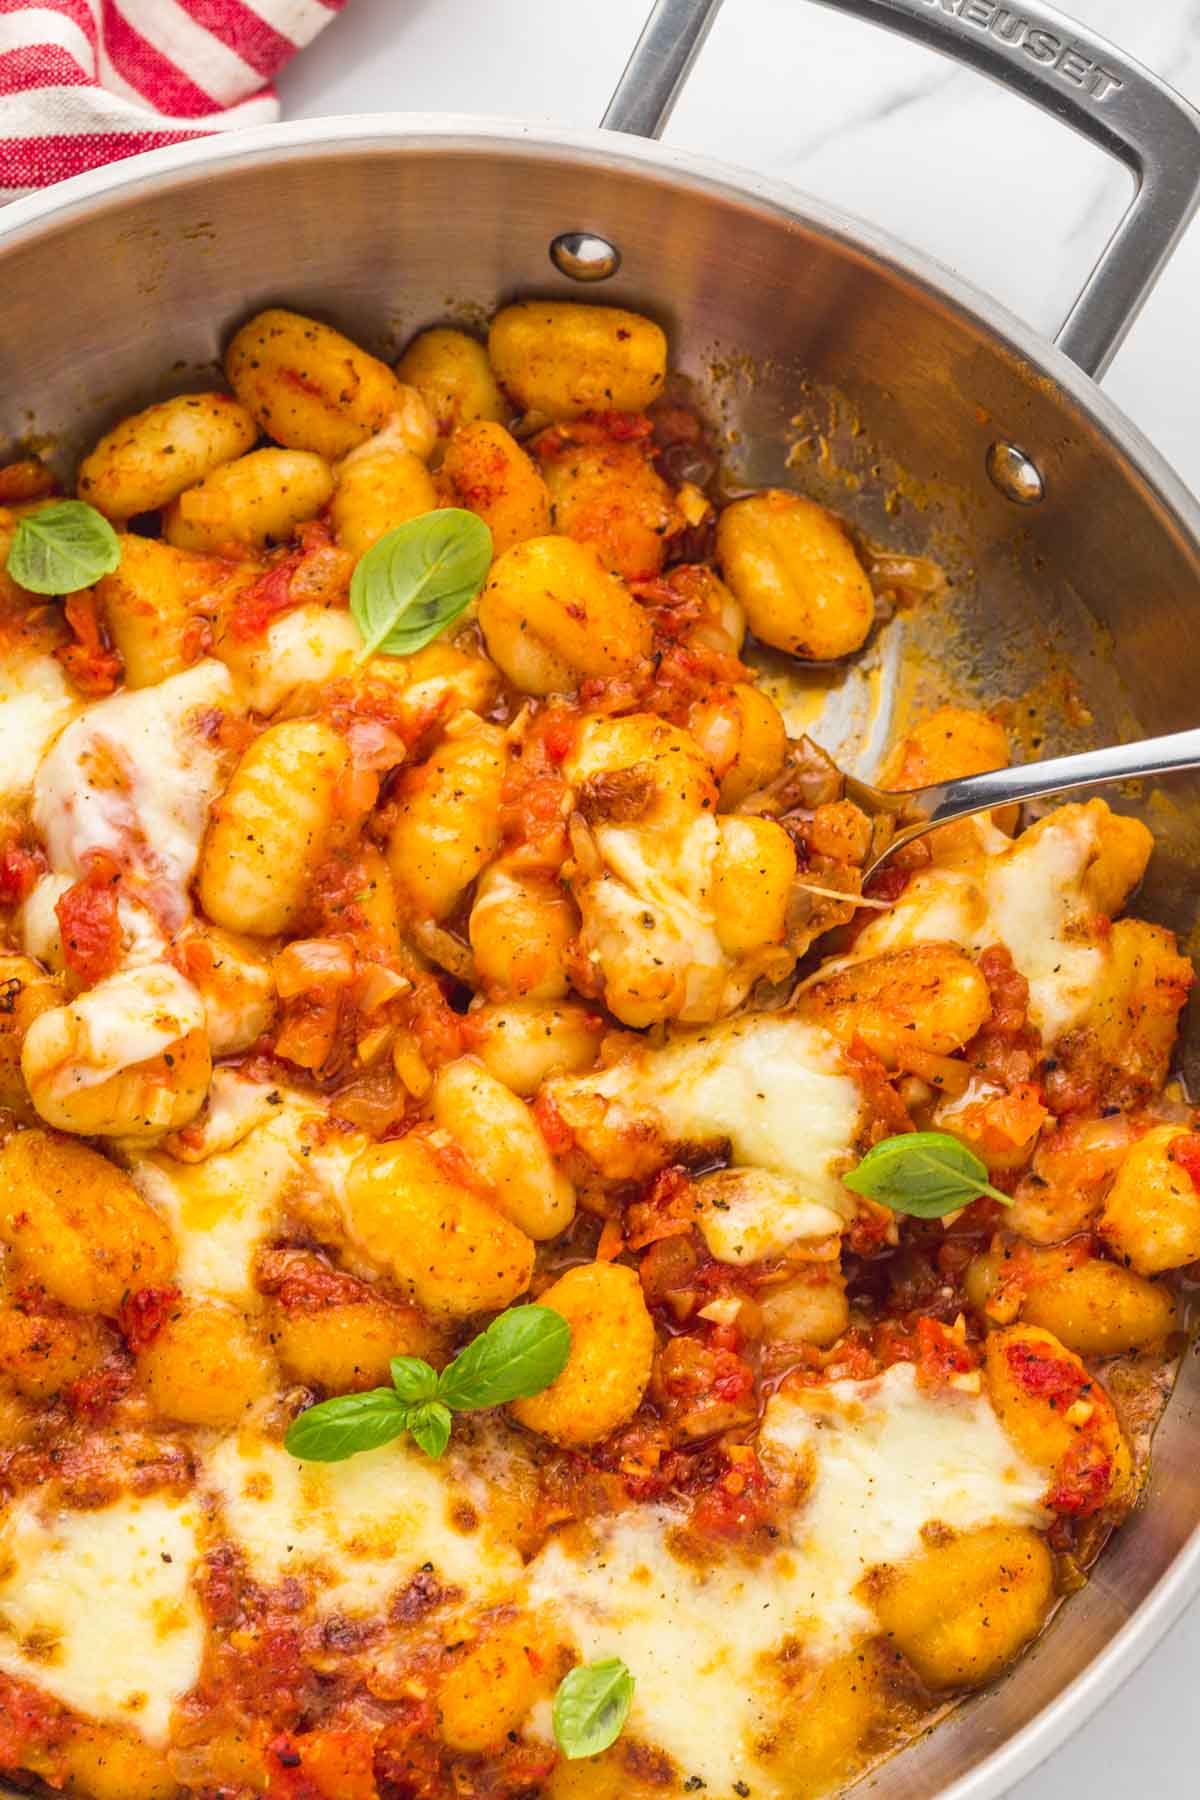 The final dish, gnocchi with al pomodoro sauce in a large skillet